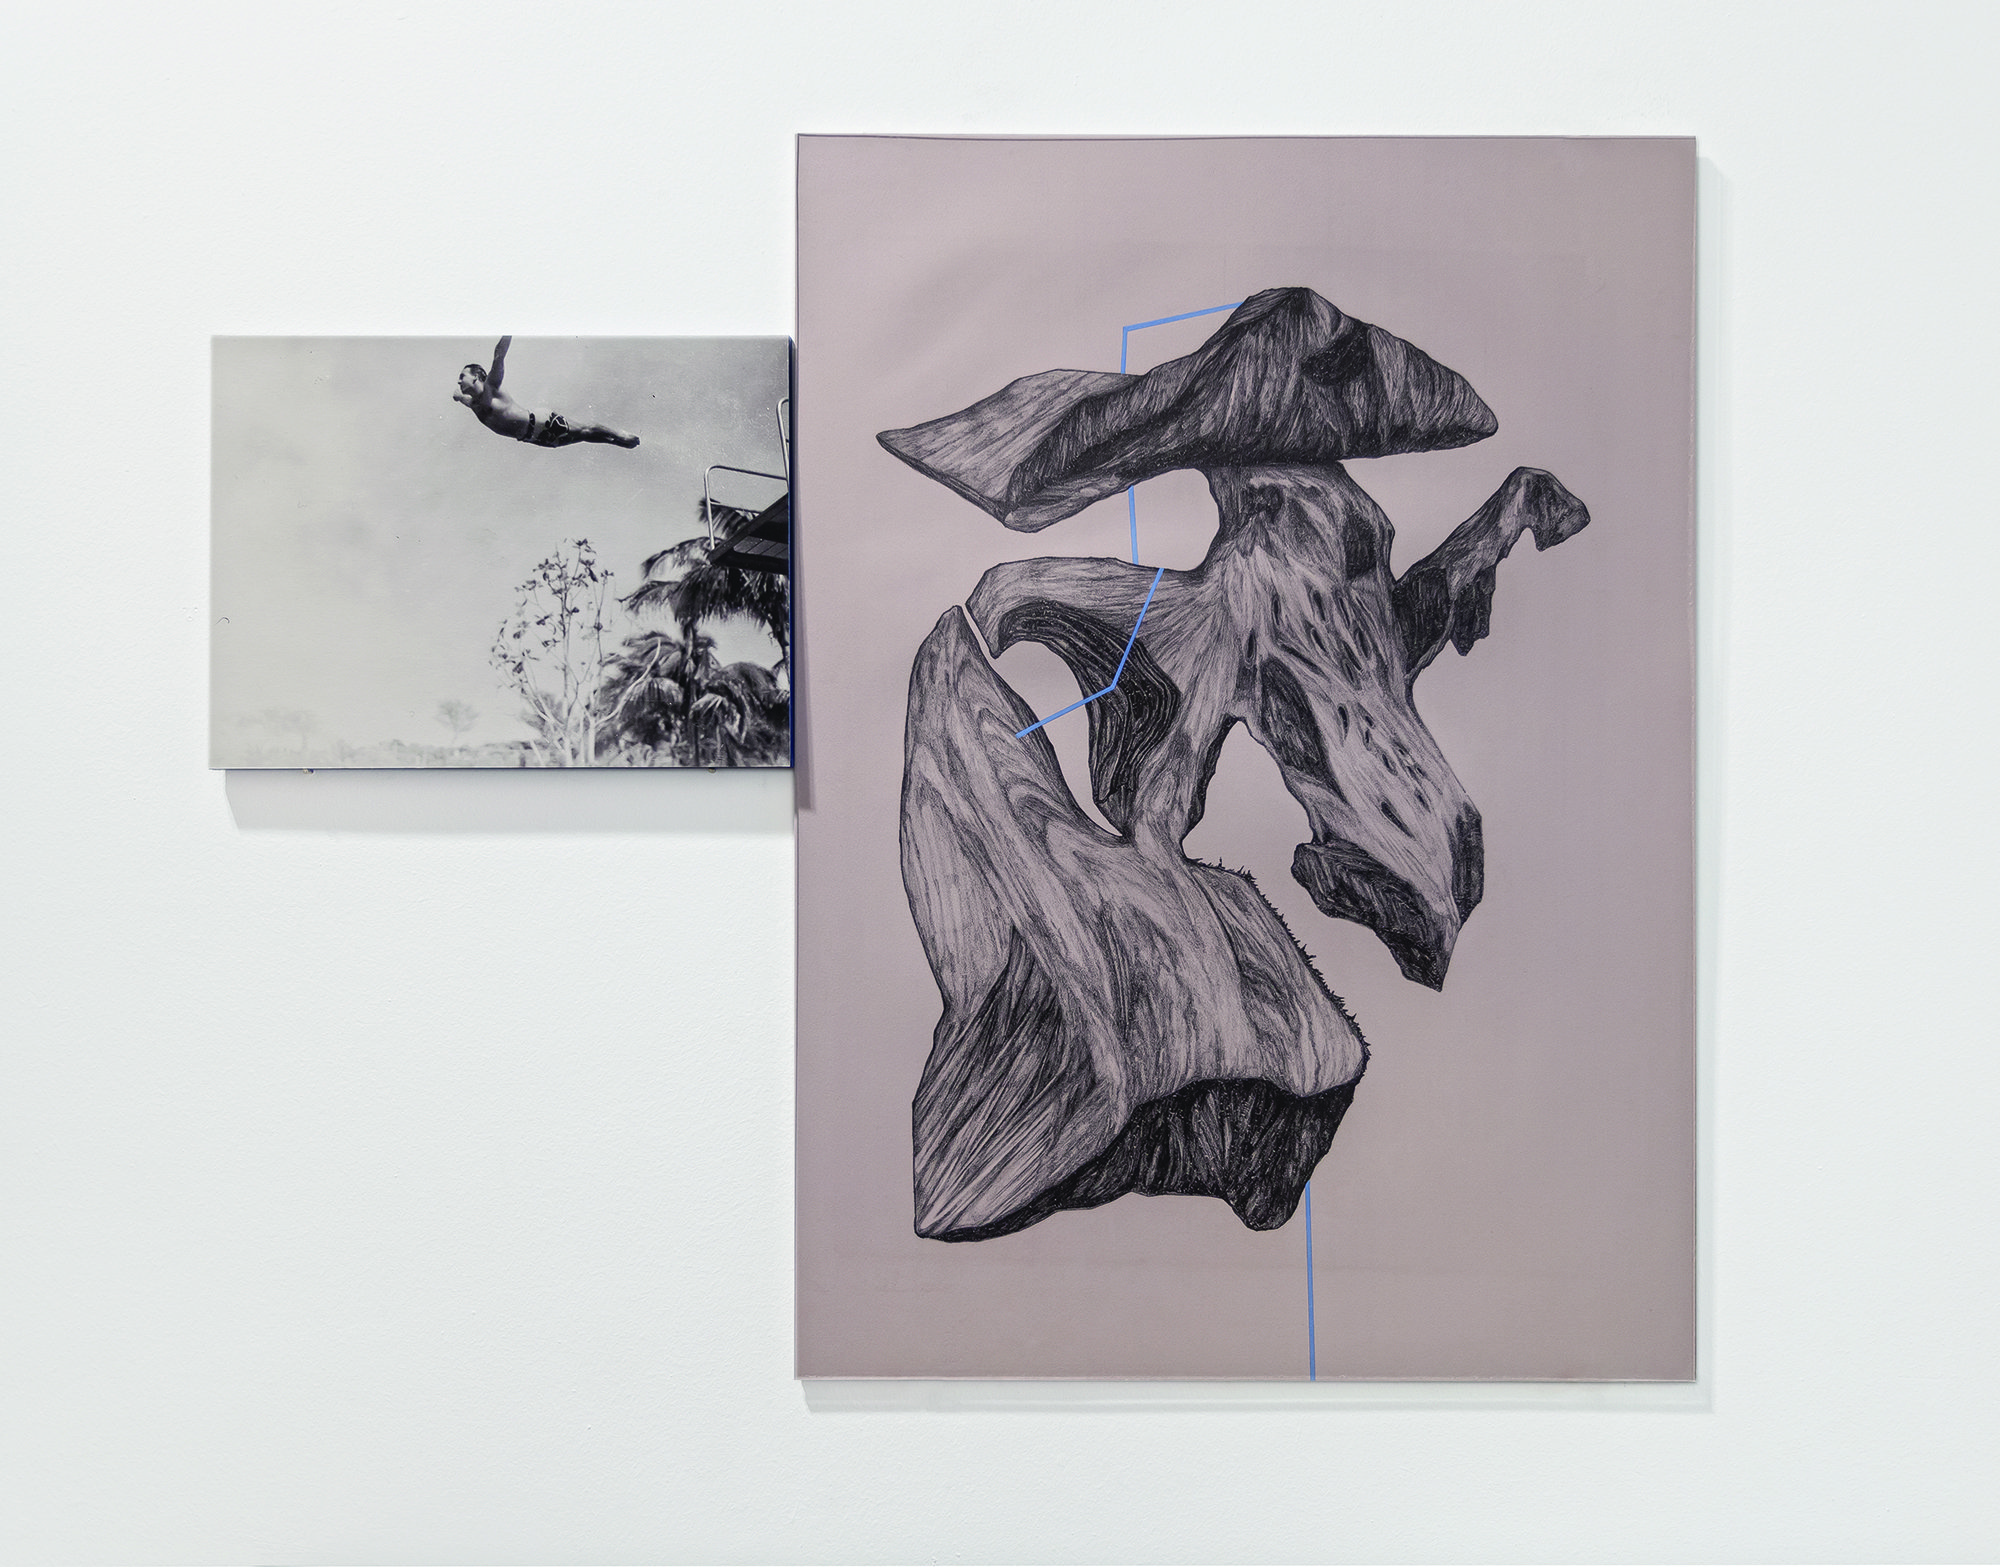 Emre Hüner, Diamond Head, Diving Man, diptych, lithography on silkscreen print, on photograph, on wooden panel, 8.2 x 49.5 cm and 32.8 x 23.7 cm (3 1/4 x 19 1/2 in and 12 7/8 x 9 3/8 in), 2013